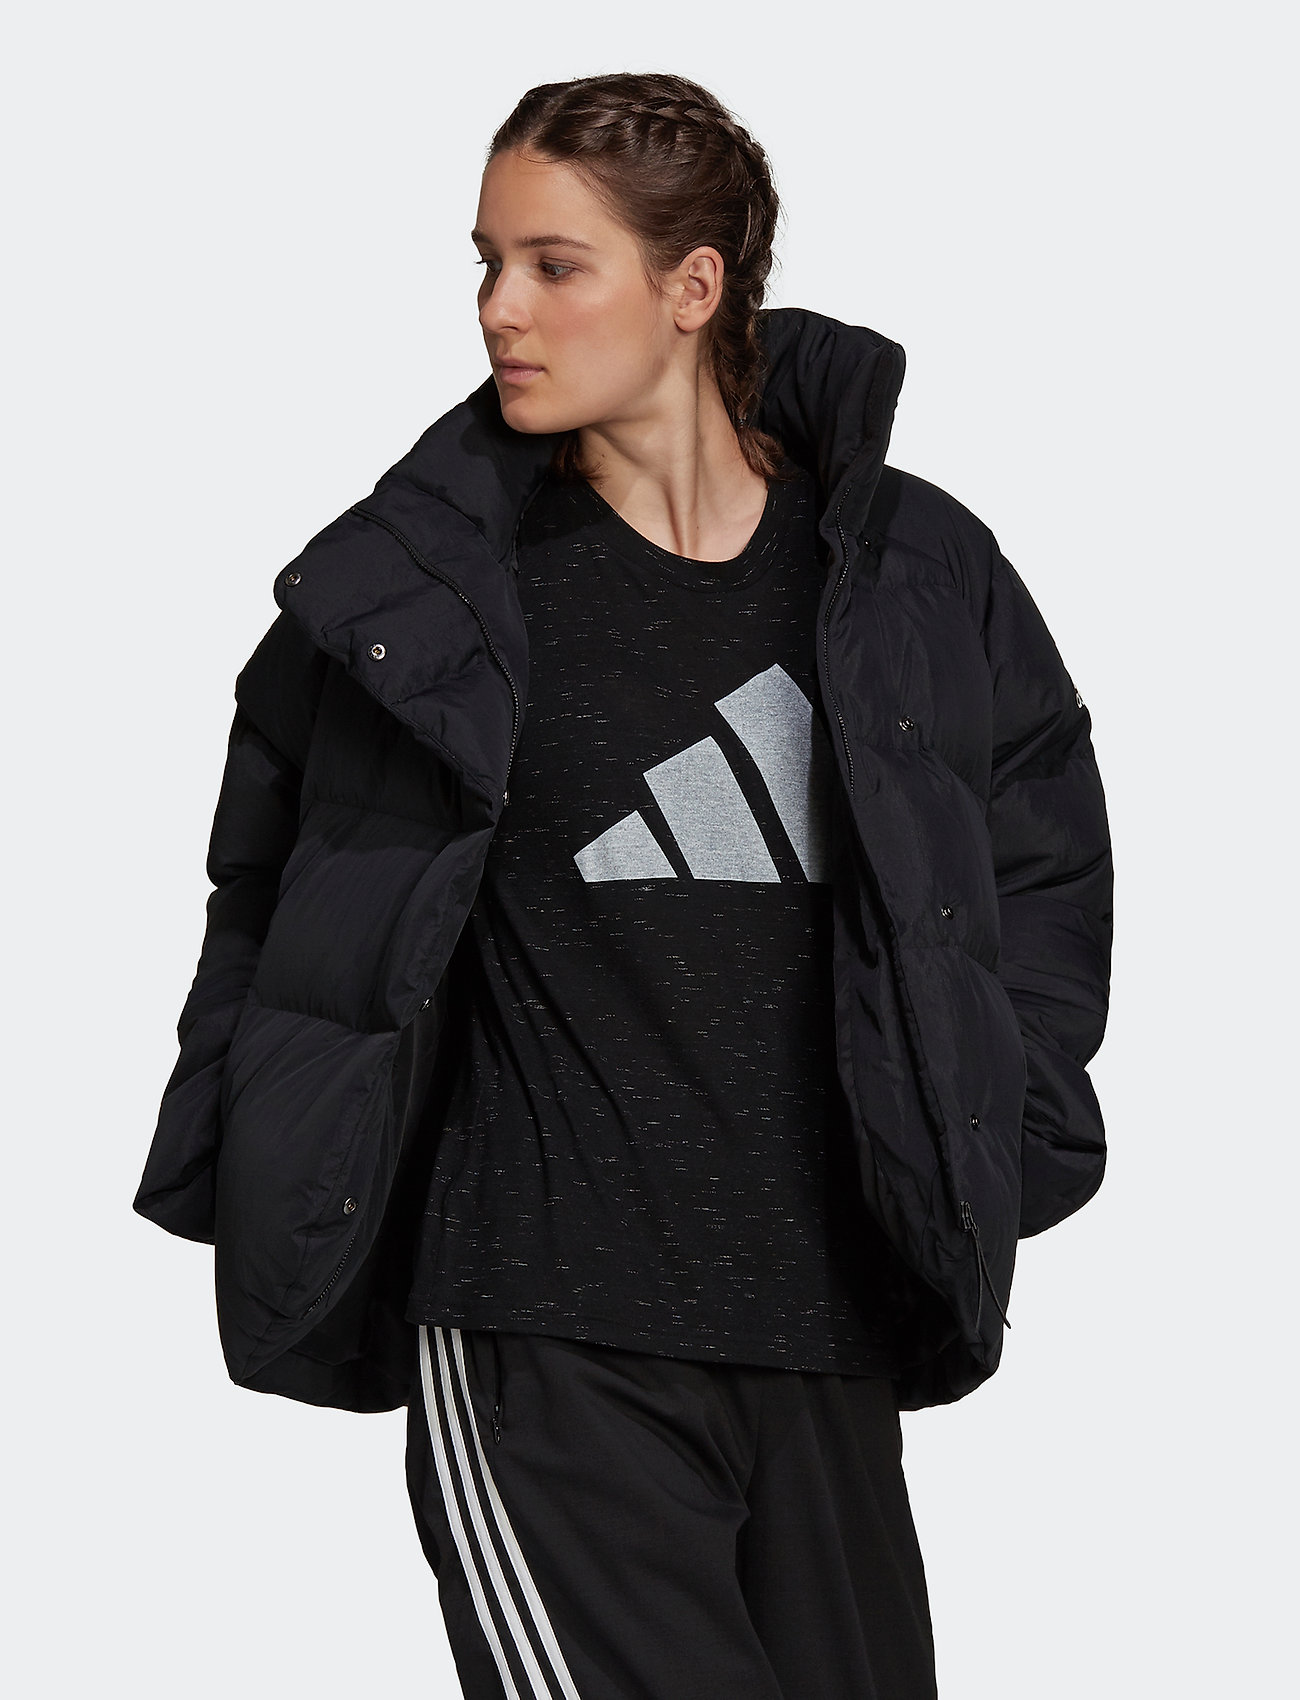 online Down - Baffle & €. and returns adidas Sportswear jackets delivery Down- at padded from Sportswear Big Fast adidas Boozt.com. Buy easy 230 Jacket W